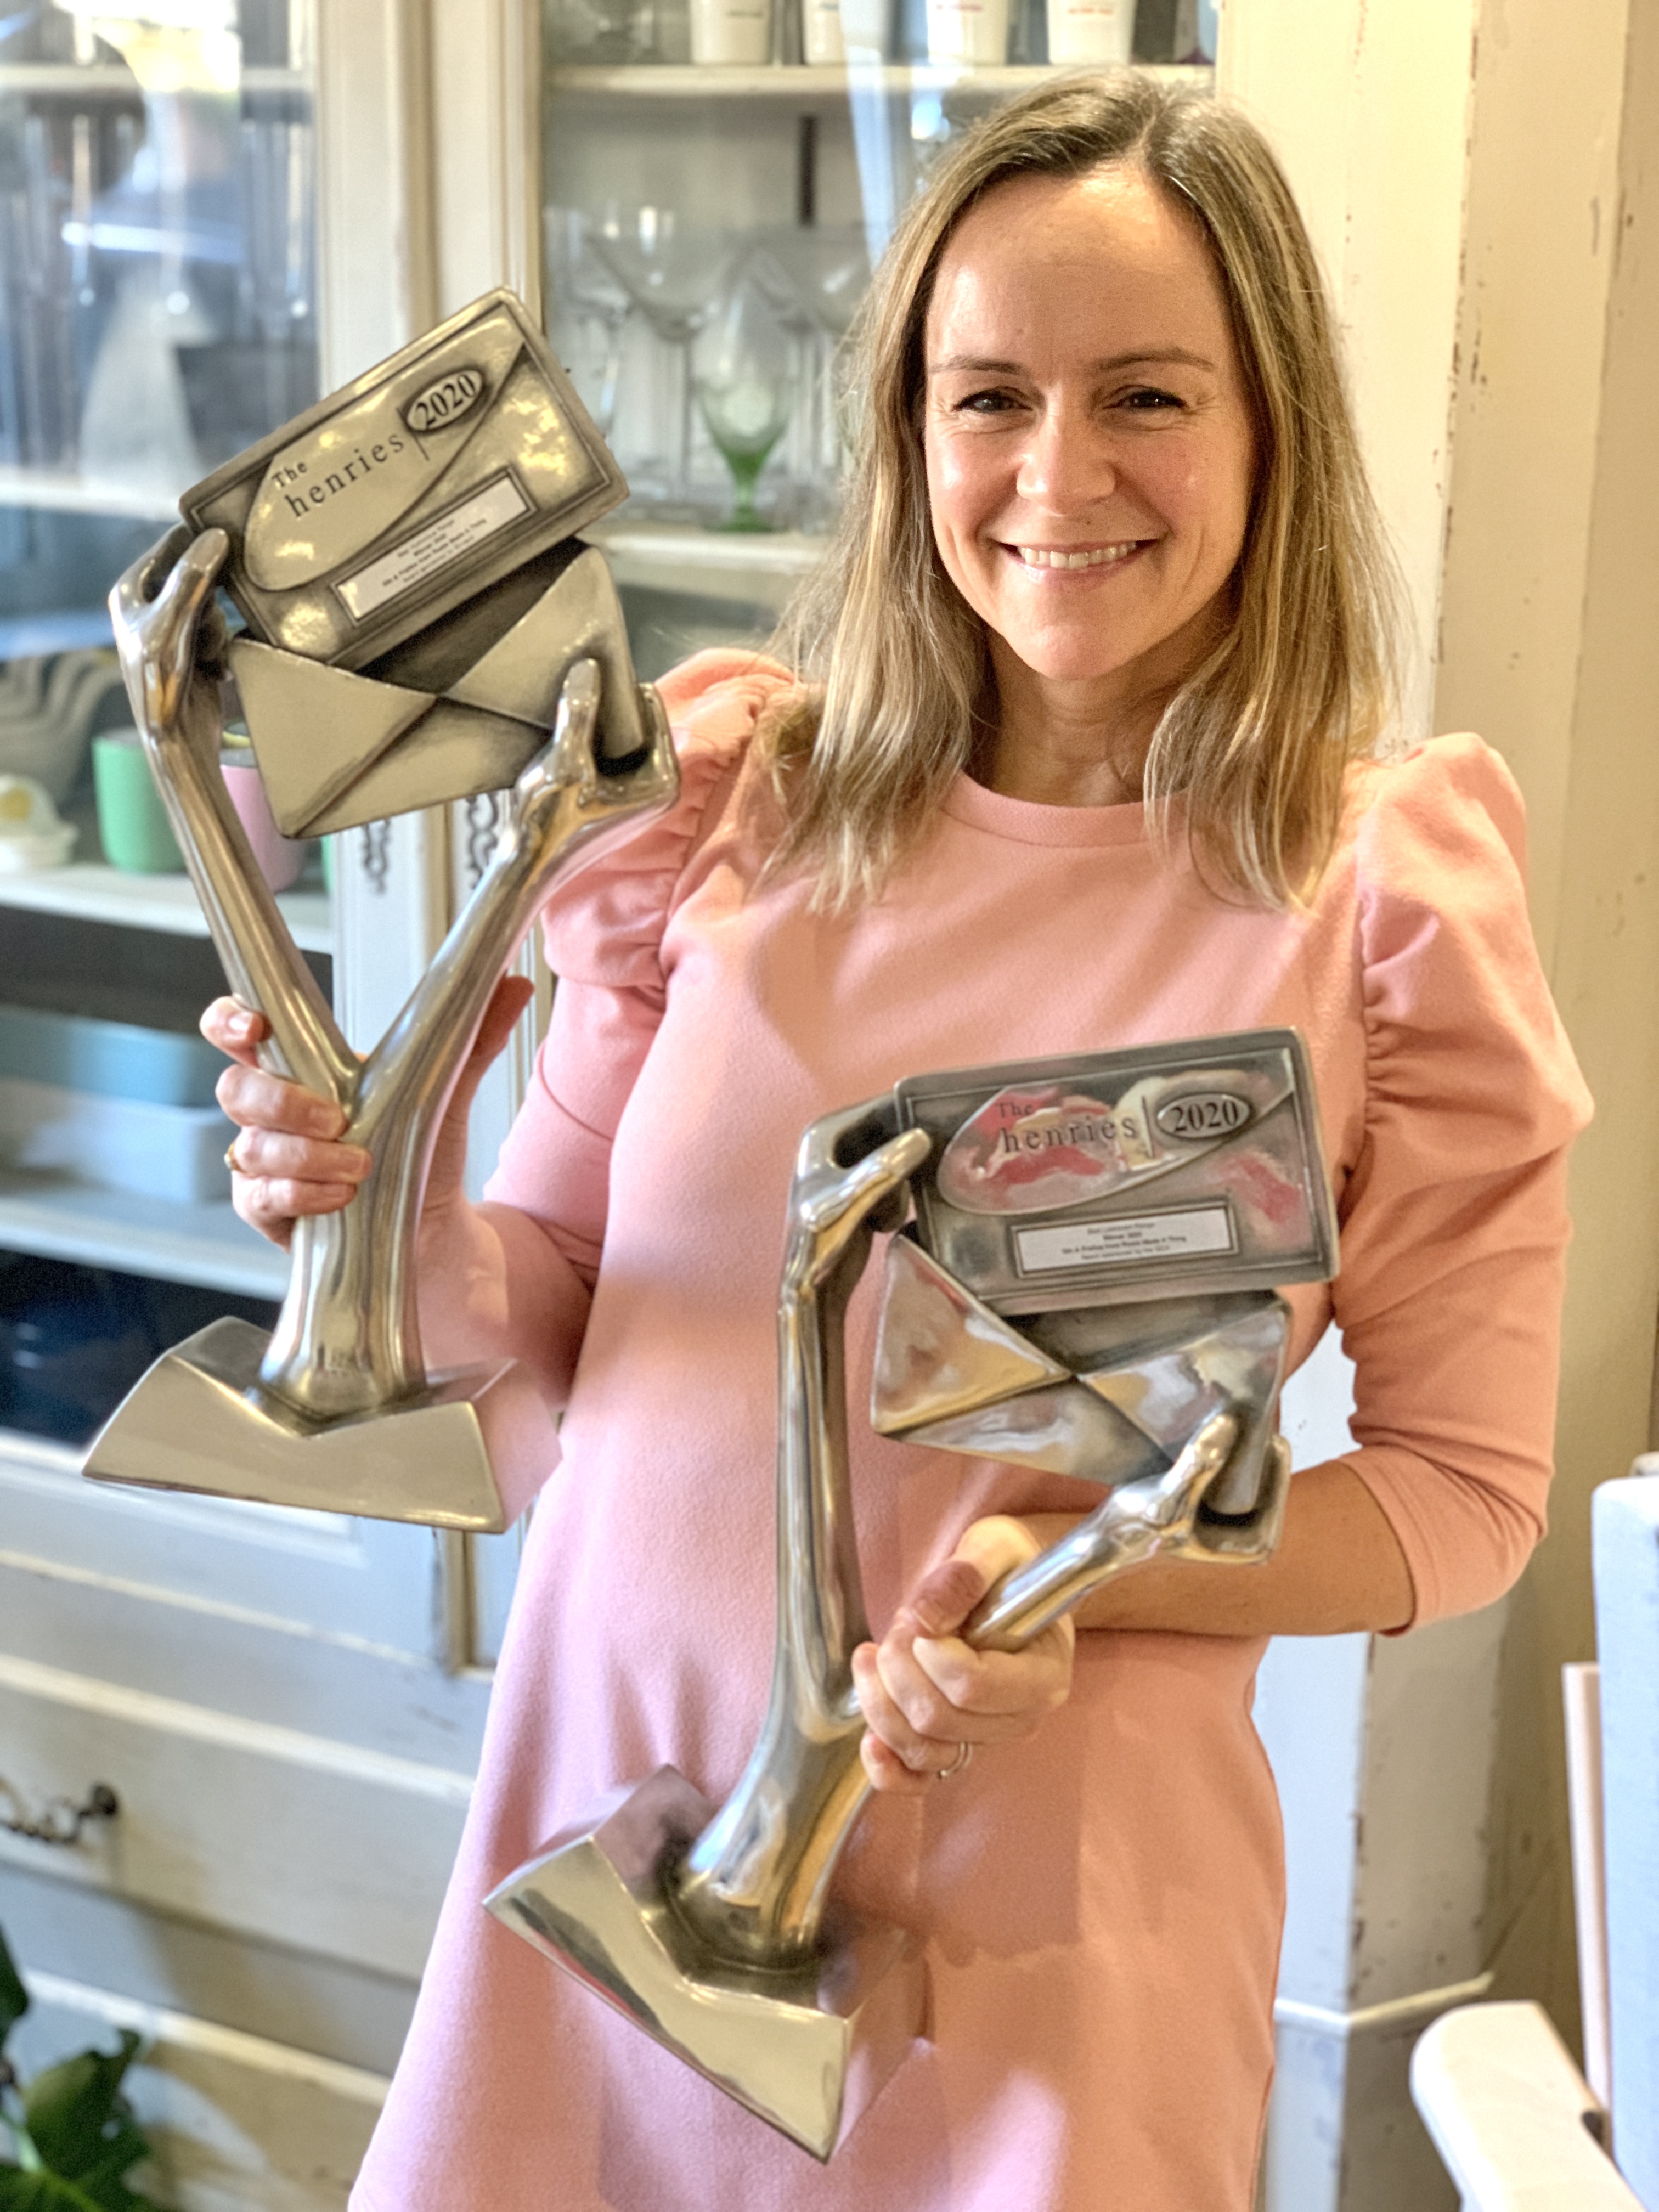 Above: Rosie Harrison, founder and md of Rosie Made a Thing with her two Henries 2020 trophies. 